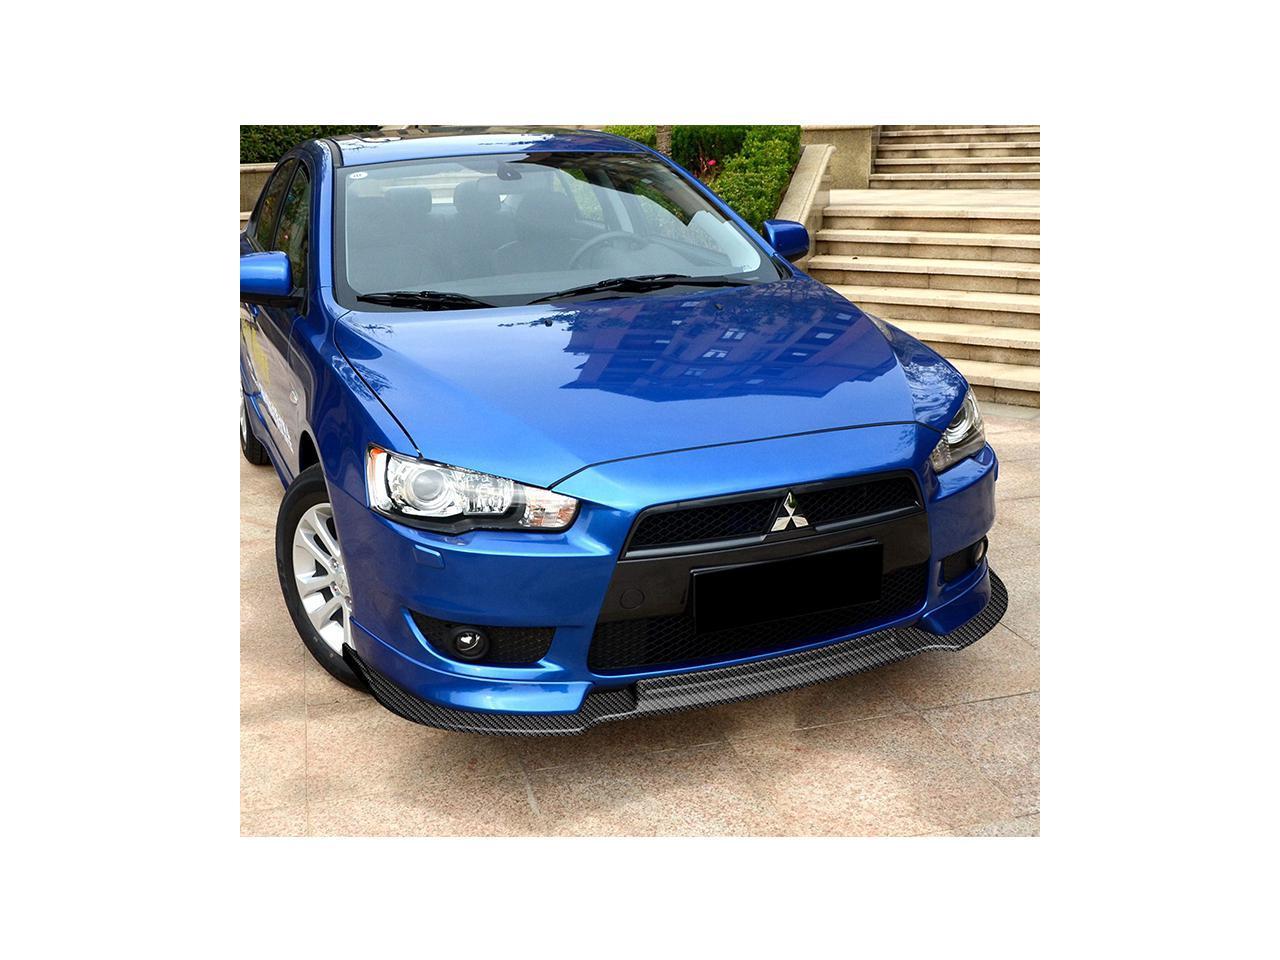 Compatible with 08 09 10 11 12 13 14 15 Mitsubishi Lancer Replacement for Front Bumper Air Dam Lip Spoiler Body Kit Plastic Primer 2008 2009 2010 2011 2012 2013 2014 2015 Brand EAX 